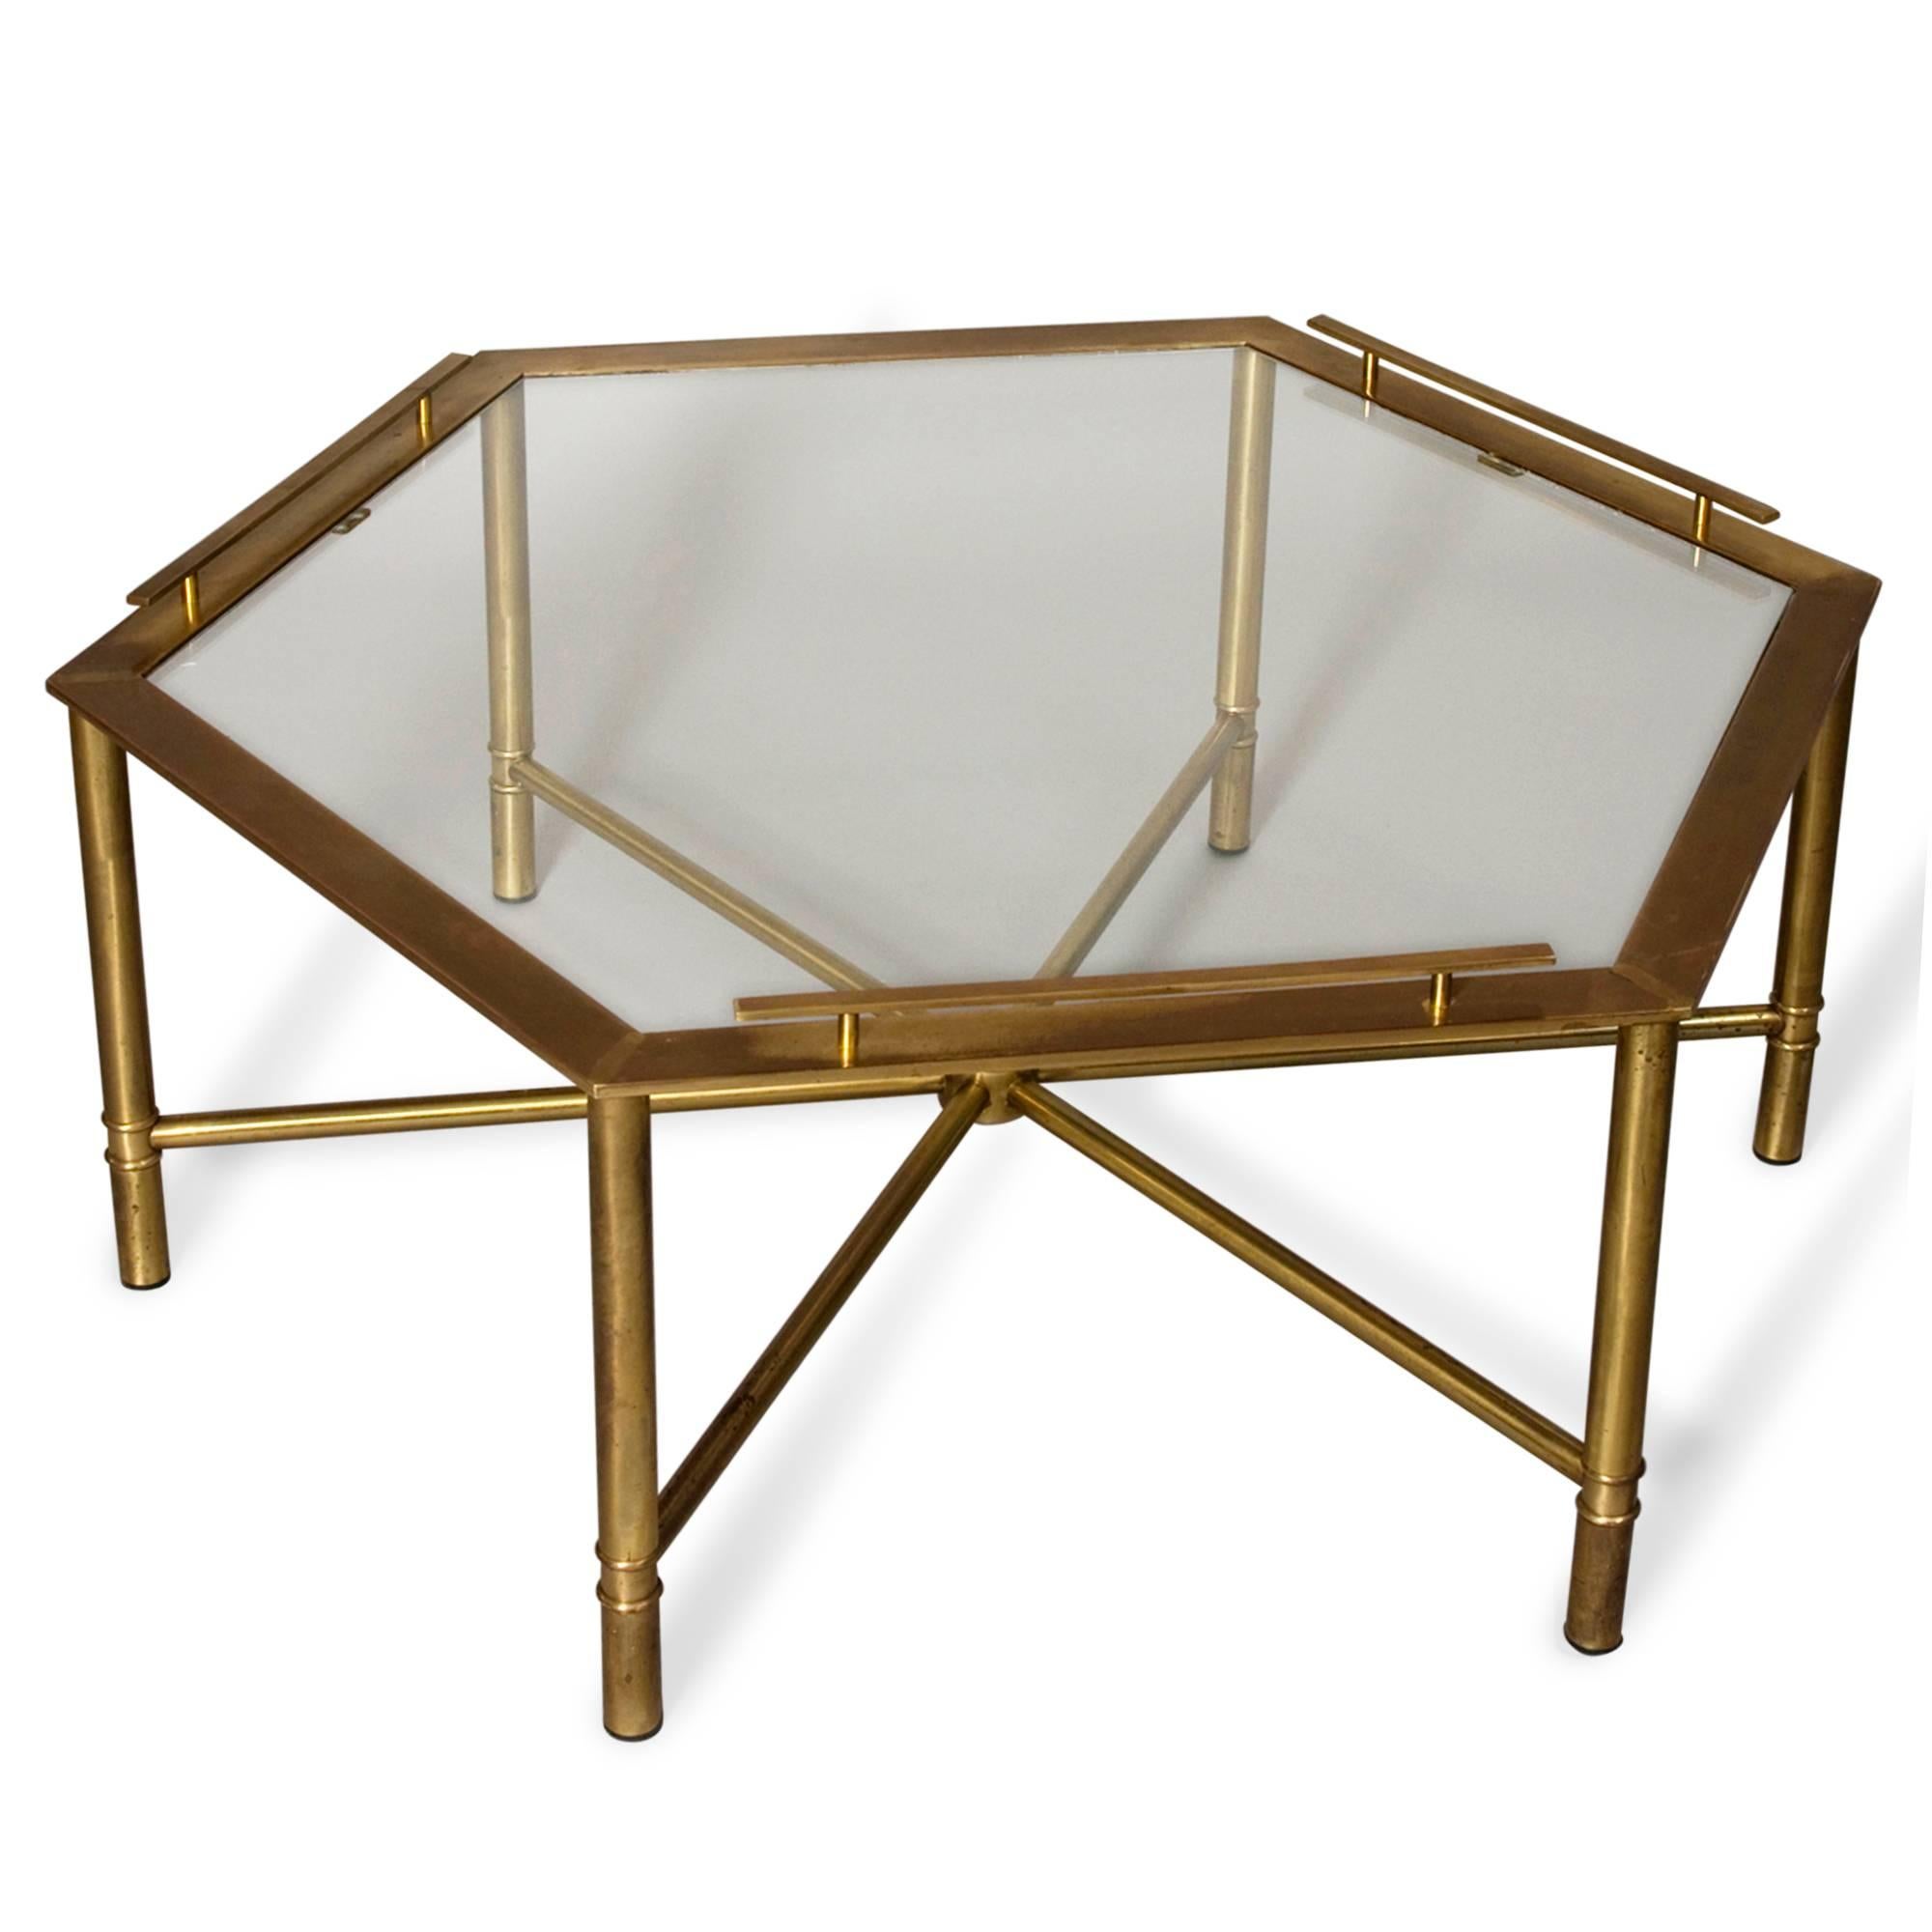 Bronze hexagonal shaped coffee table, with glass top, on six legs having stretchers meeting in center, and three of six sides of hexagon having raised gallery type edge, by Mastercraft, American 1970s. Distance from point to point 42 in, distance